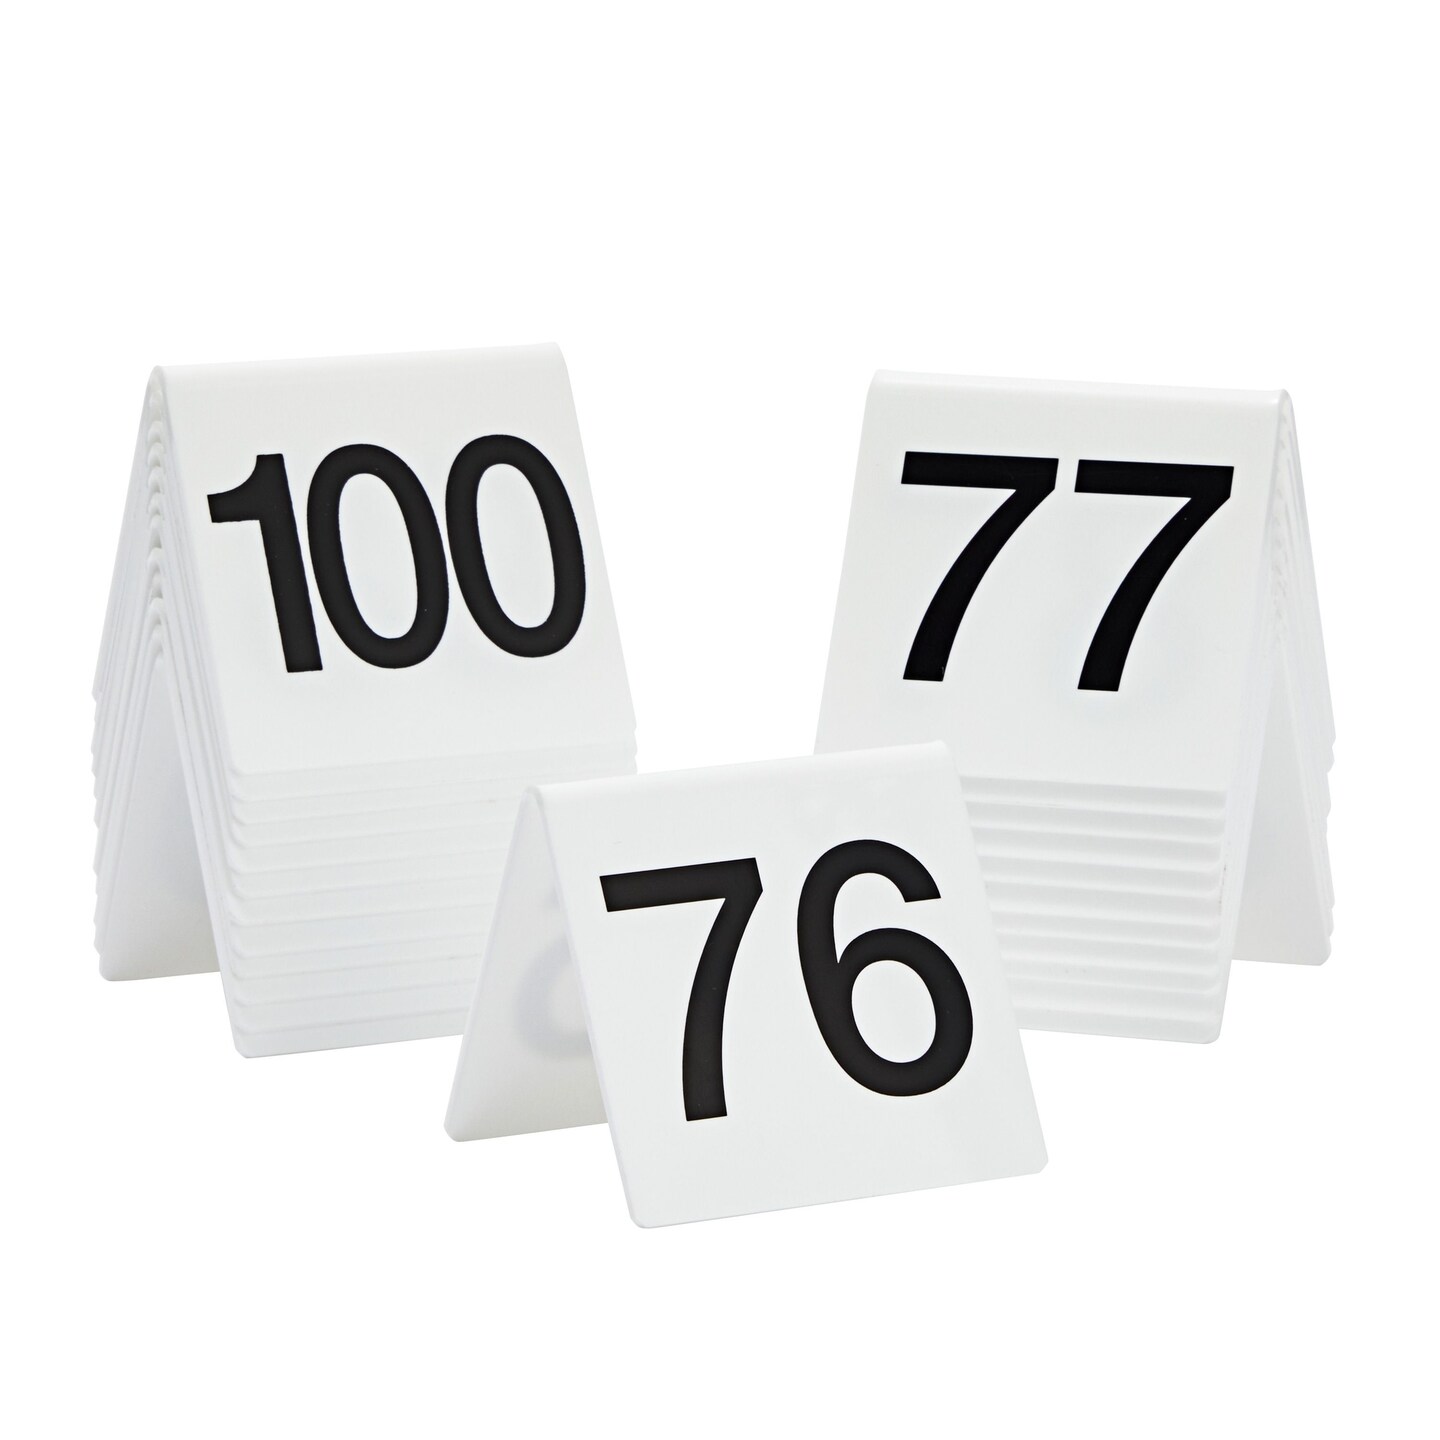 Set of 25 Acrylic Table Numbers for Wedding Reception, Plastic Tent Cards Numbered 76-100 for Restaurants, Banquets (3 x 2.75 x 2.5 In)